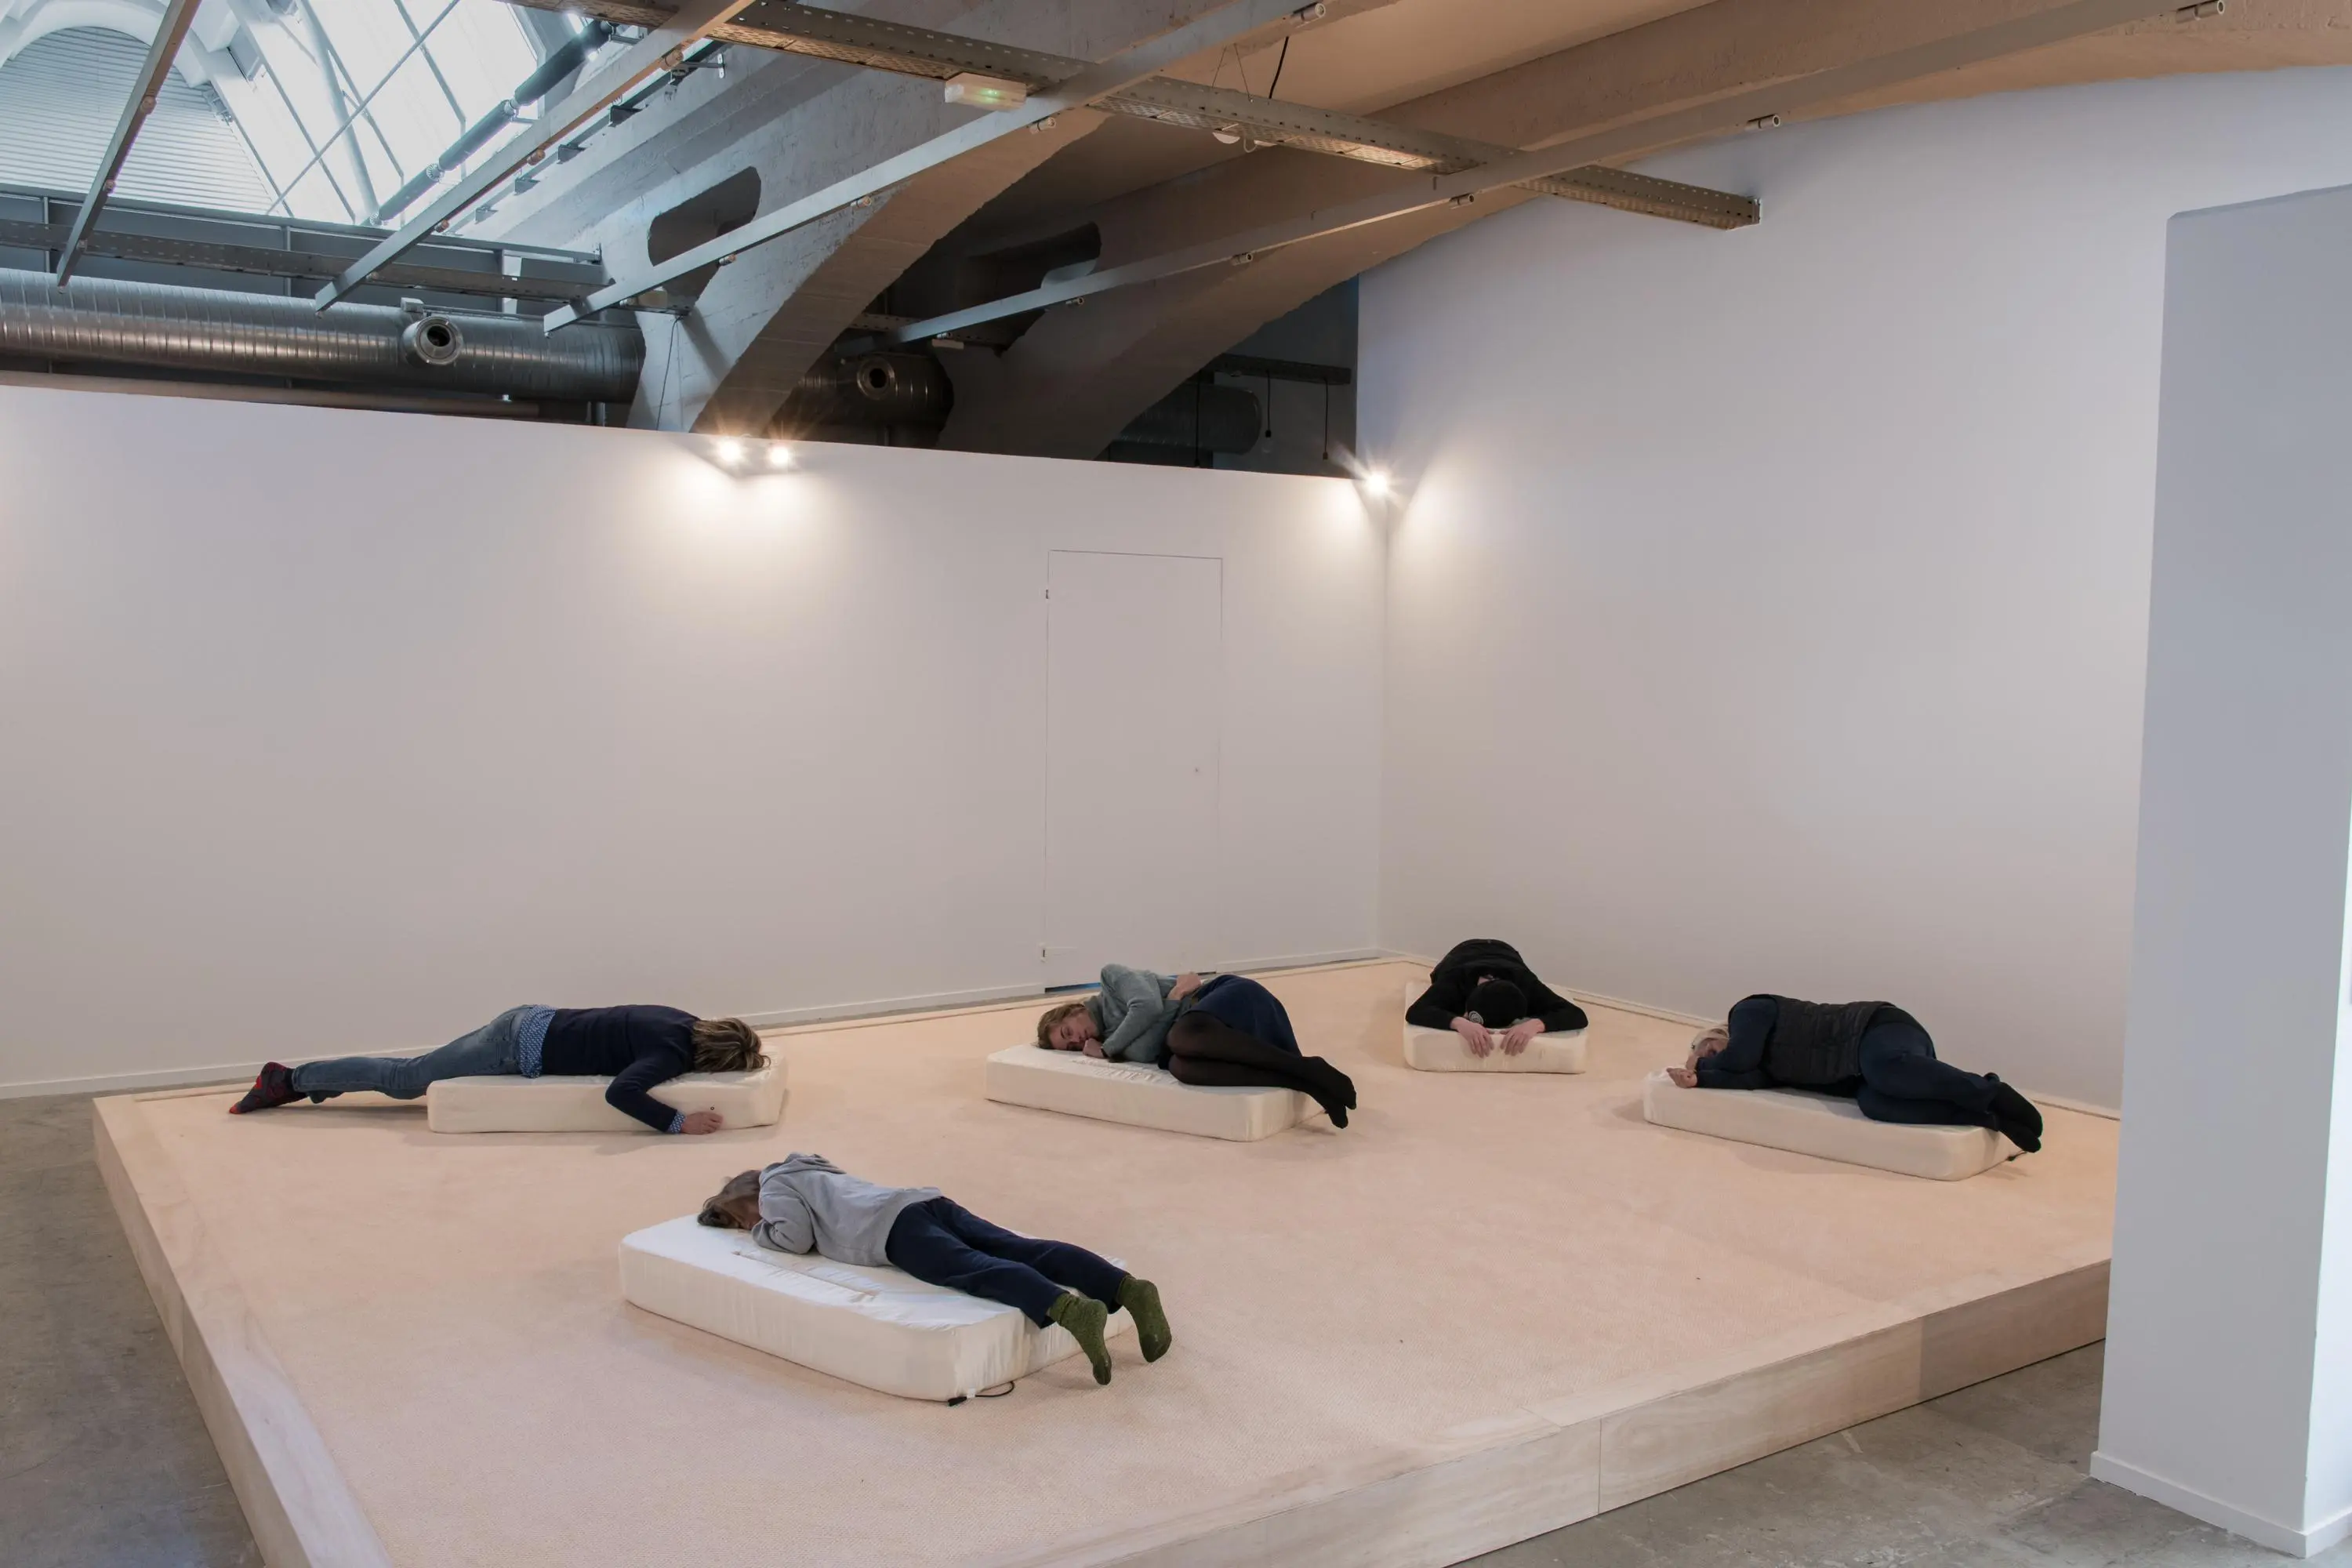 Five people in dark clothing laying on white matresses on top of a wooden platform in an otherwise empty gallery